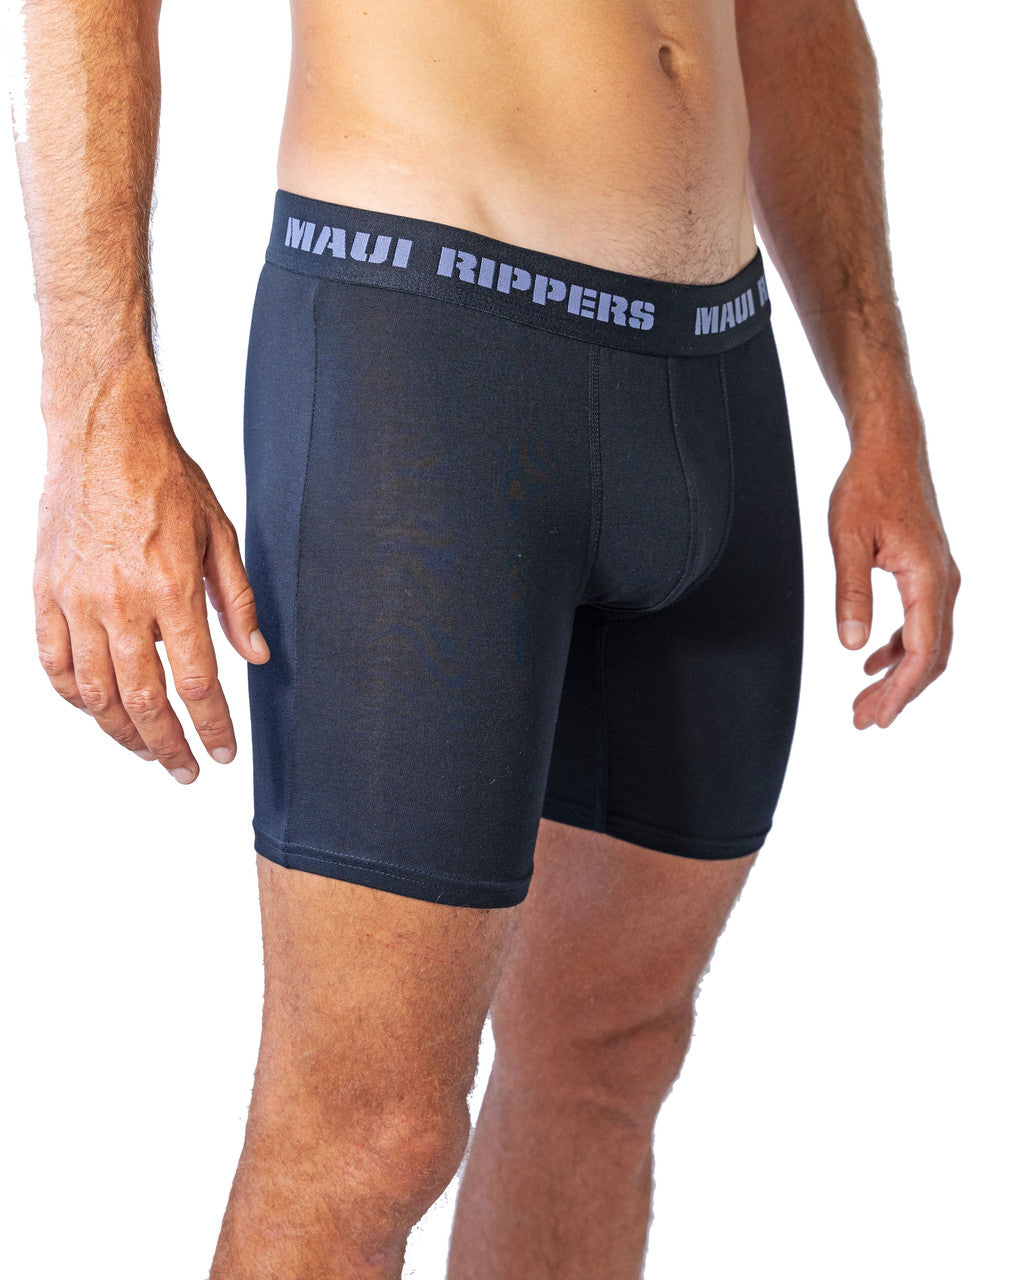 5-pack boxer shorts